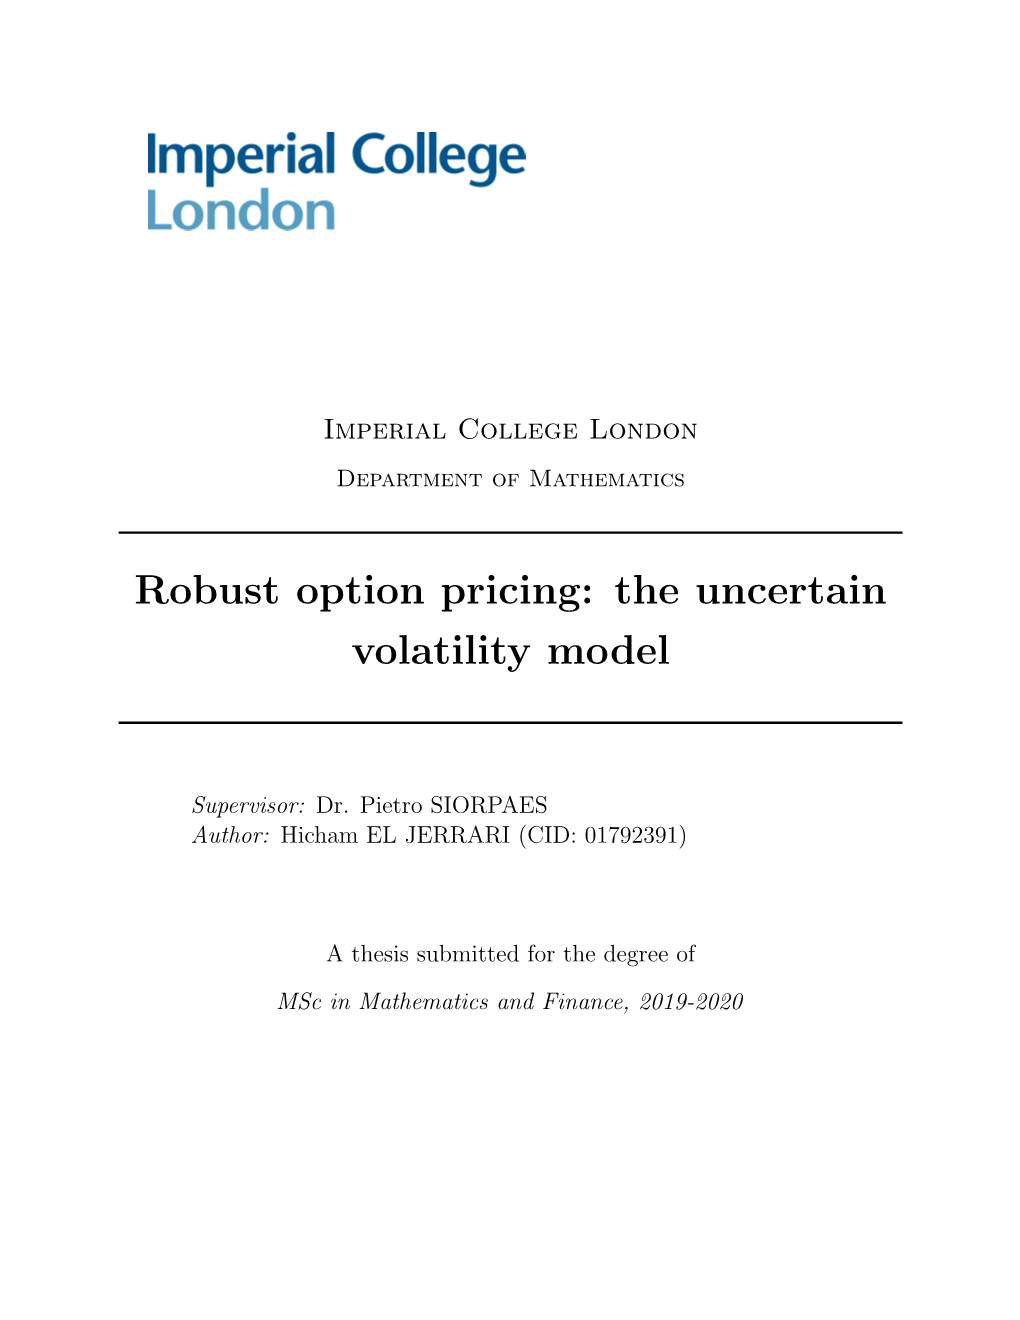 Robust Option Pricing: the Uncertain Volatility Model